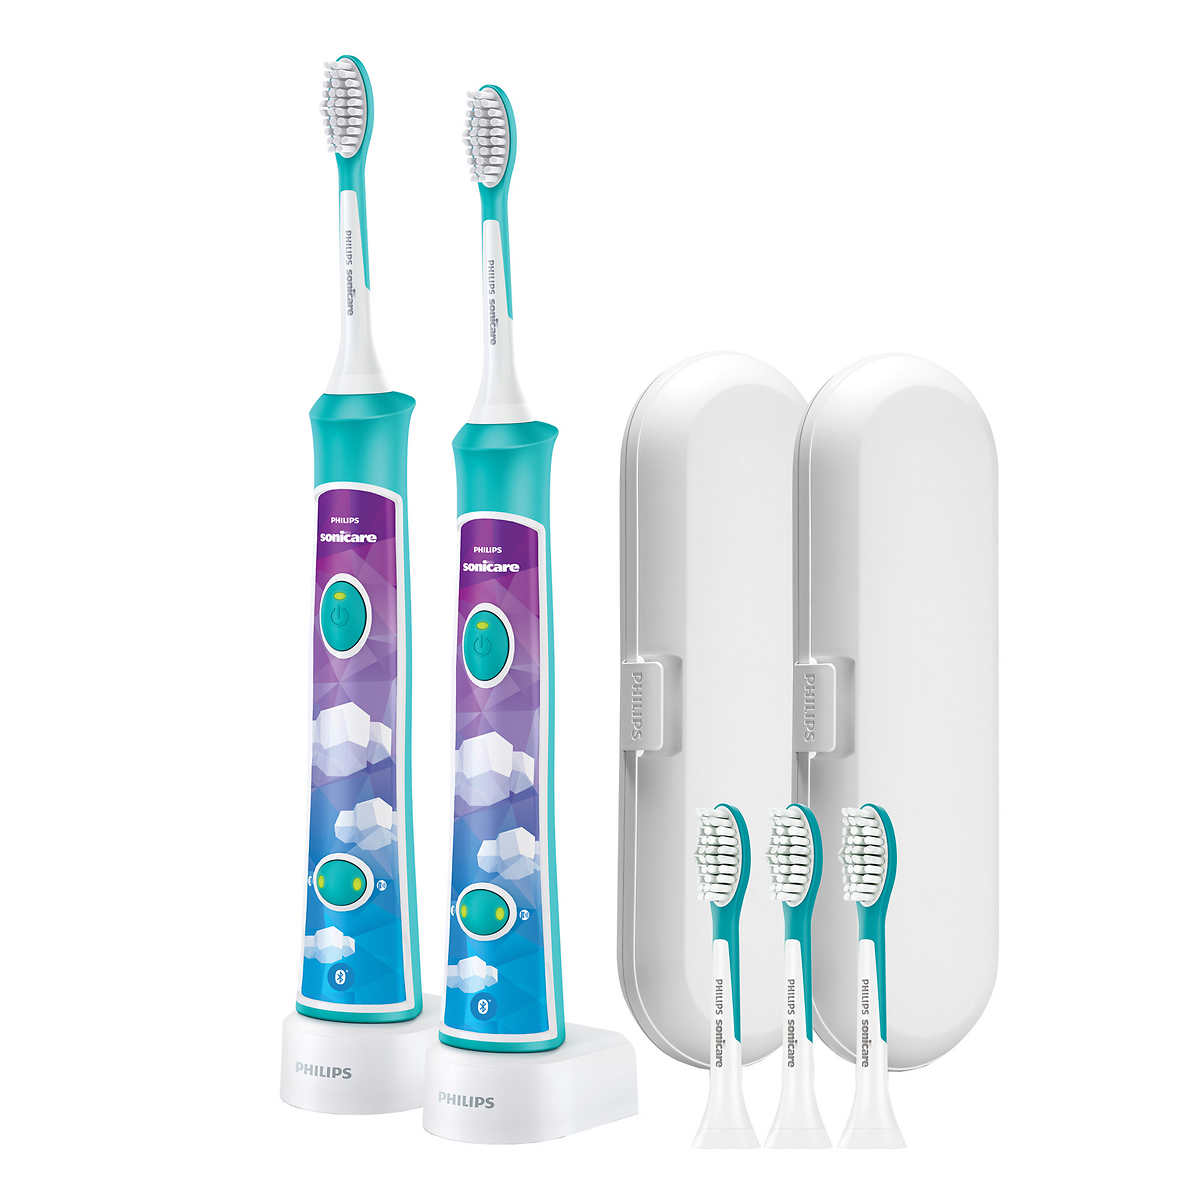 philips-sonicare-10-rebate-available-for-kids-bluetooth-connected